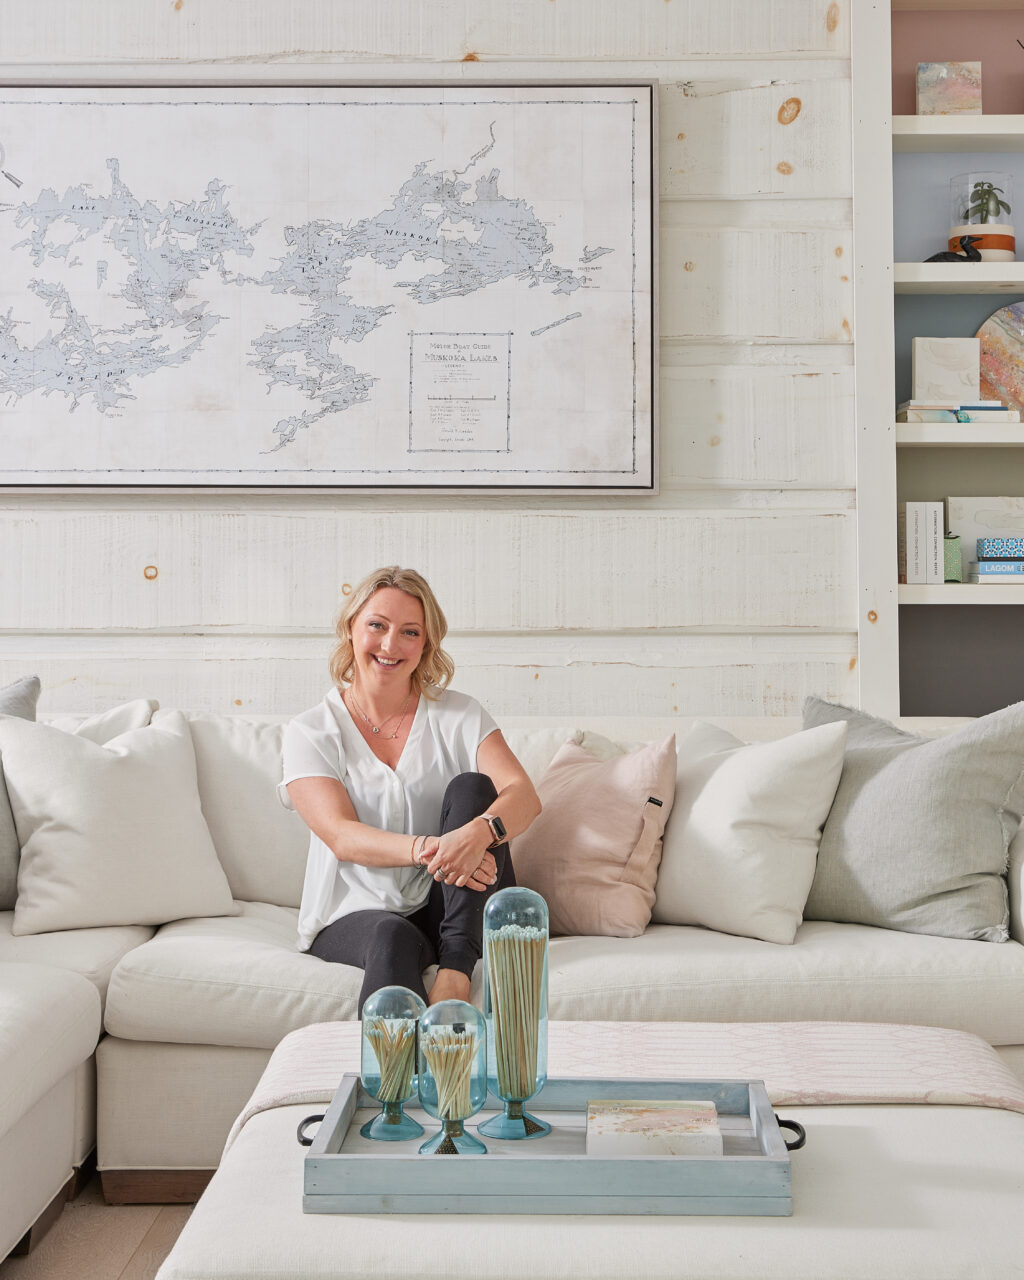 Cottage Makeover Series - Jennylyn sitting on white coach in front of white washed wood panel walls with a map of Muskoka Lakes on the wall